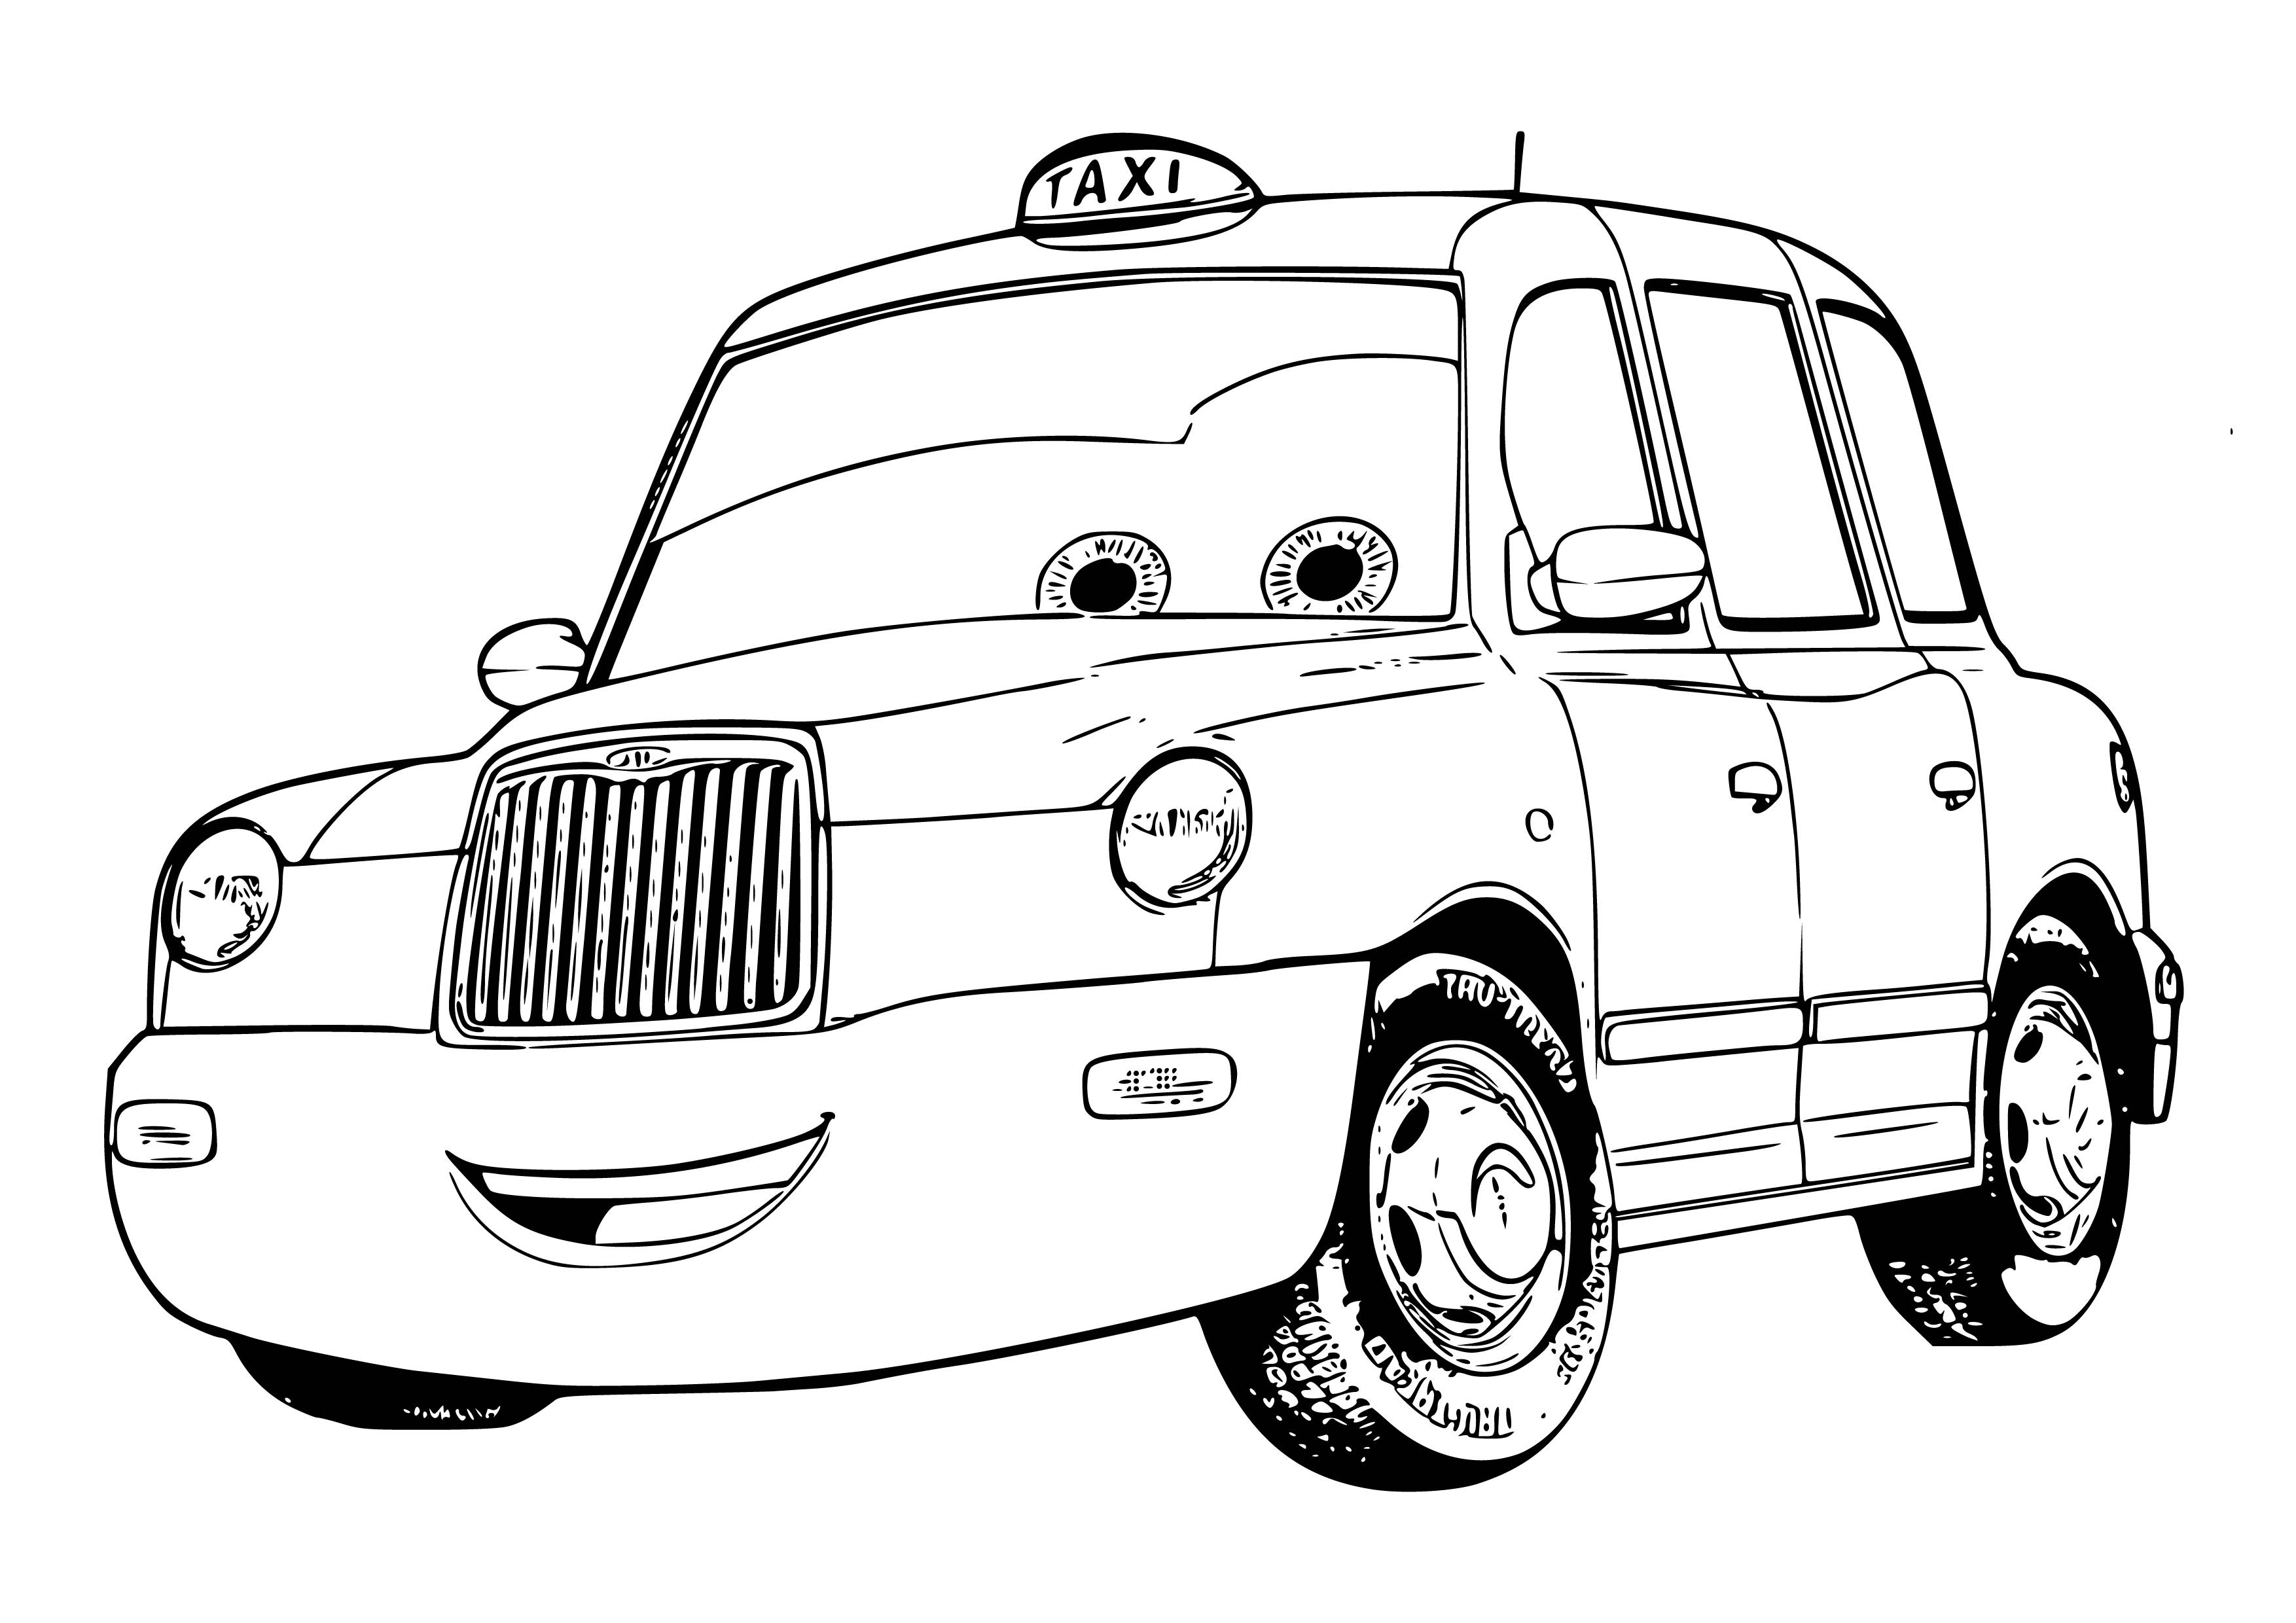 Coloring page charming car